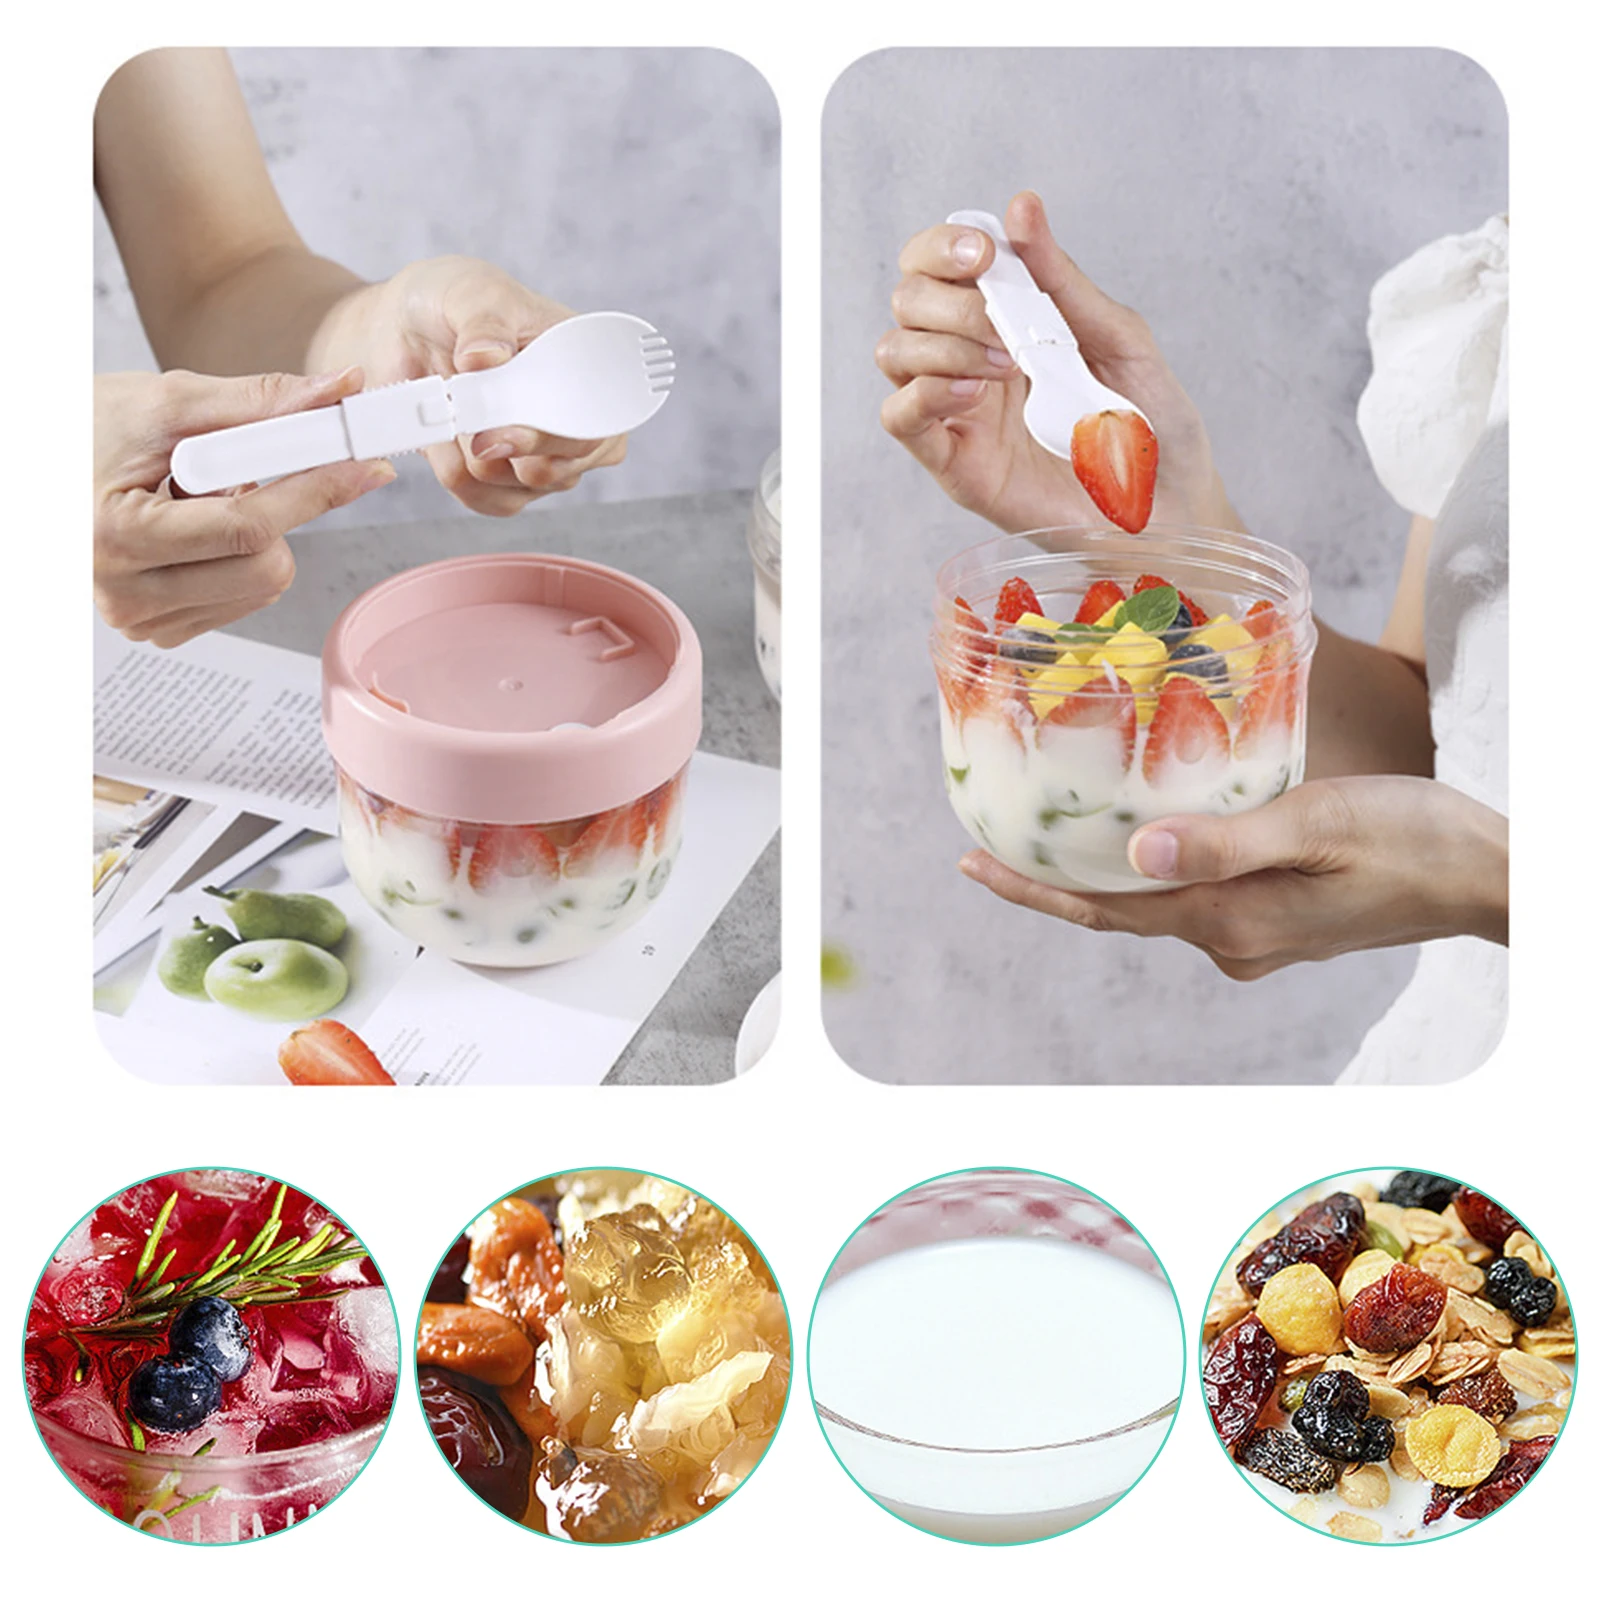 https://ae01.alicdn.com/kf/Seccadb8ceba6415bbc61d18ee841aaa4x/2pcs-Overnight-Oat-Container-20oz-600ml-Breakfast-On-the-Go-Cups-with-Lid-and-Foldable-Spoon.jpg